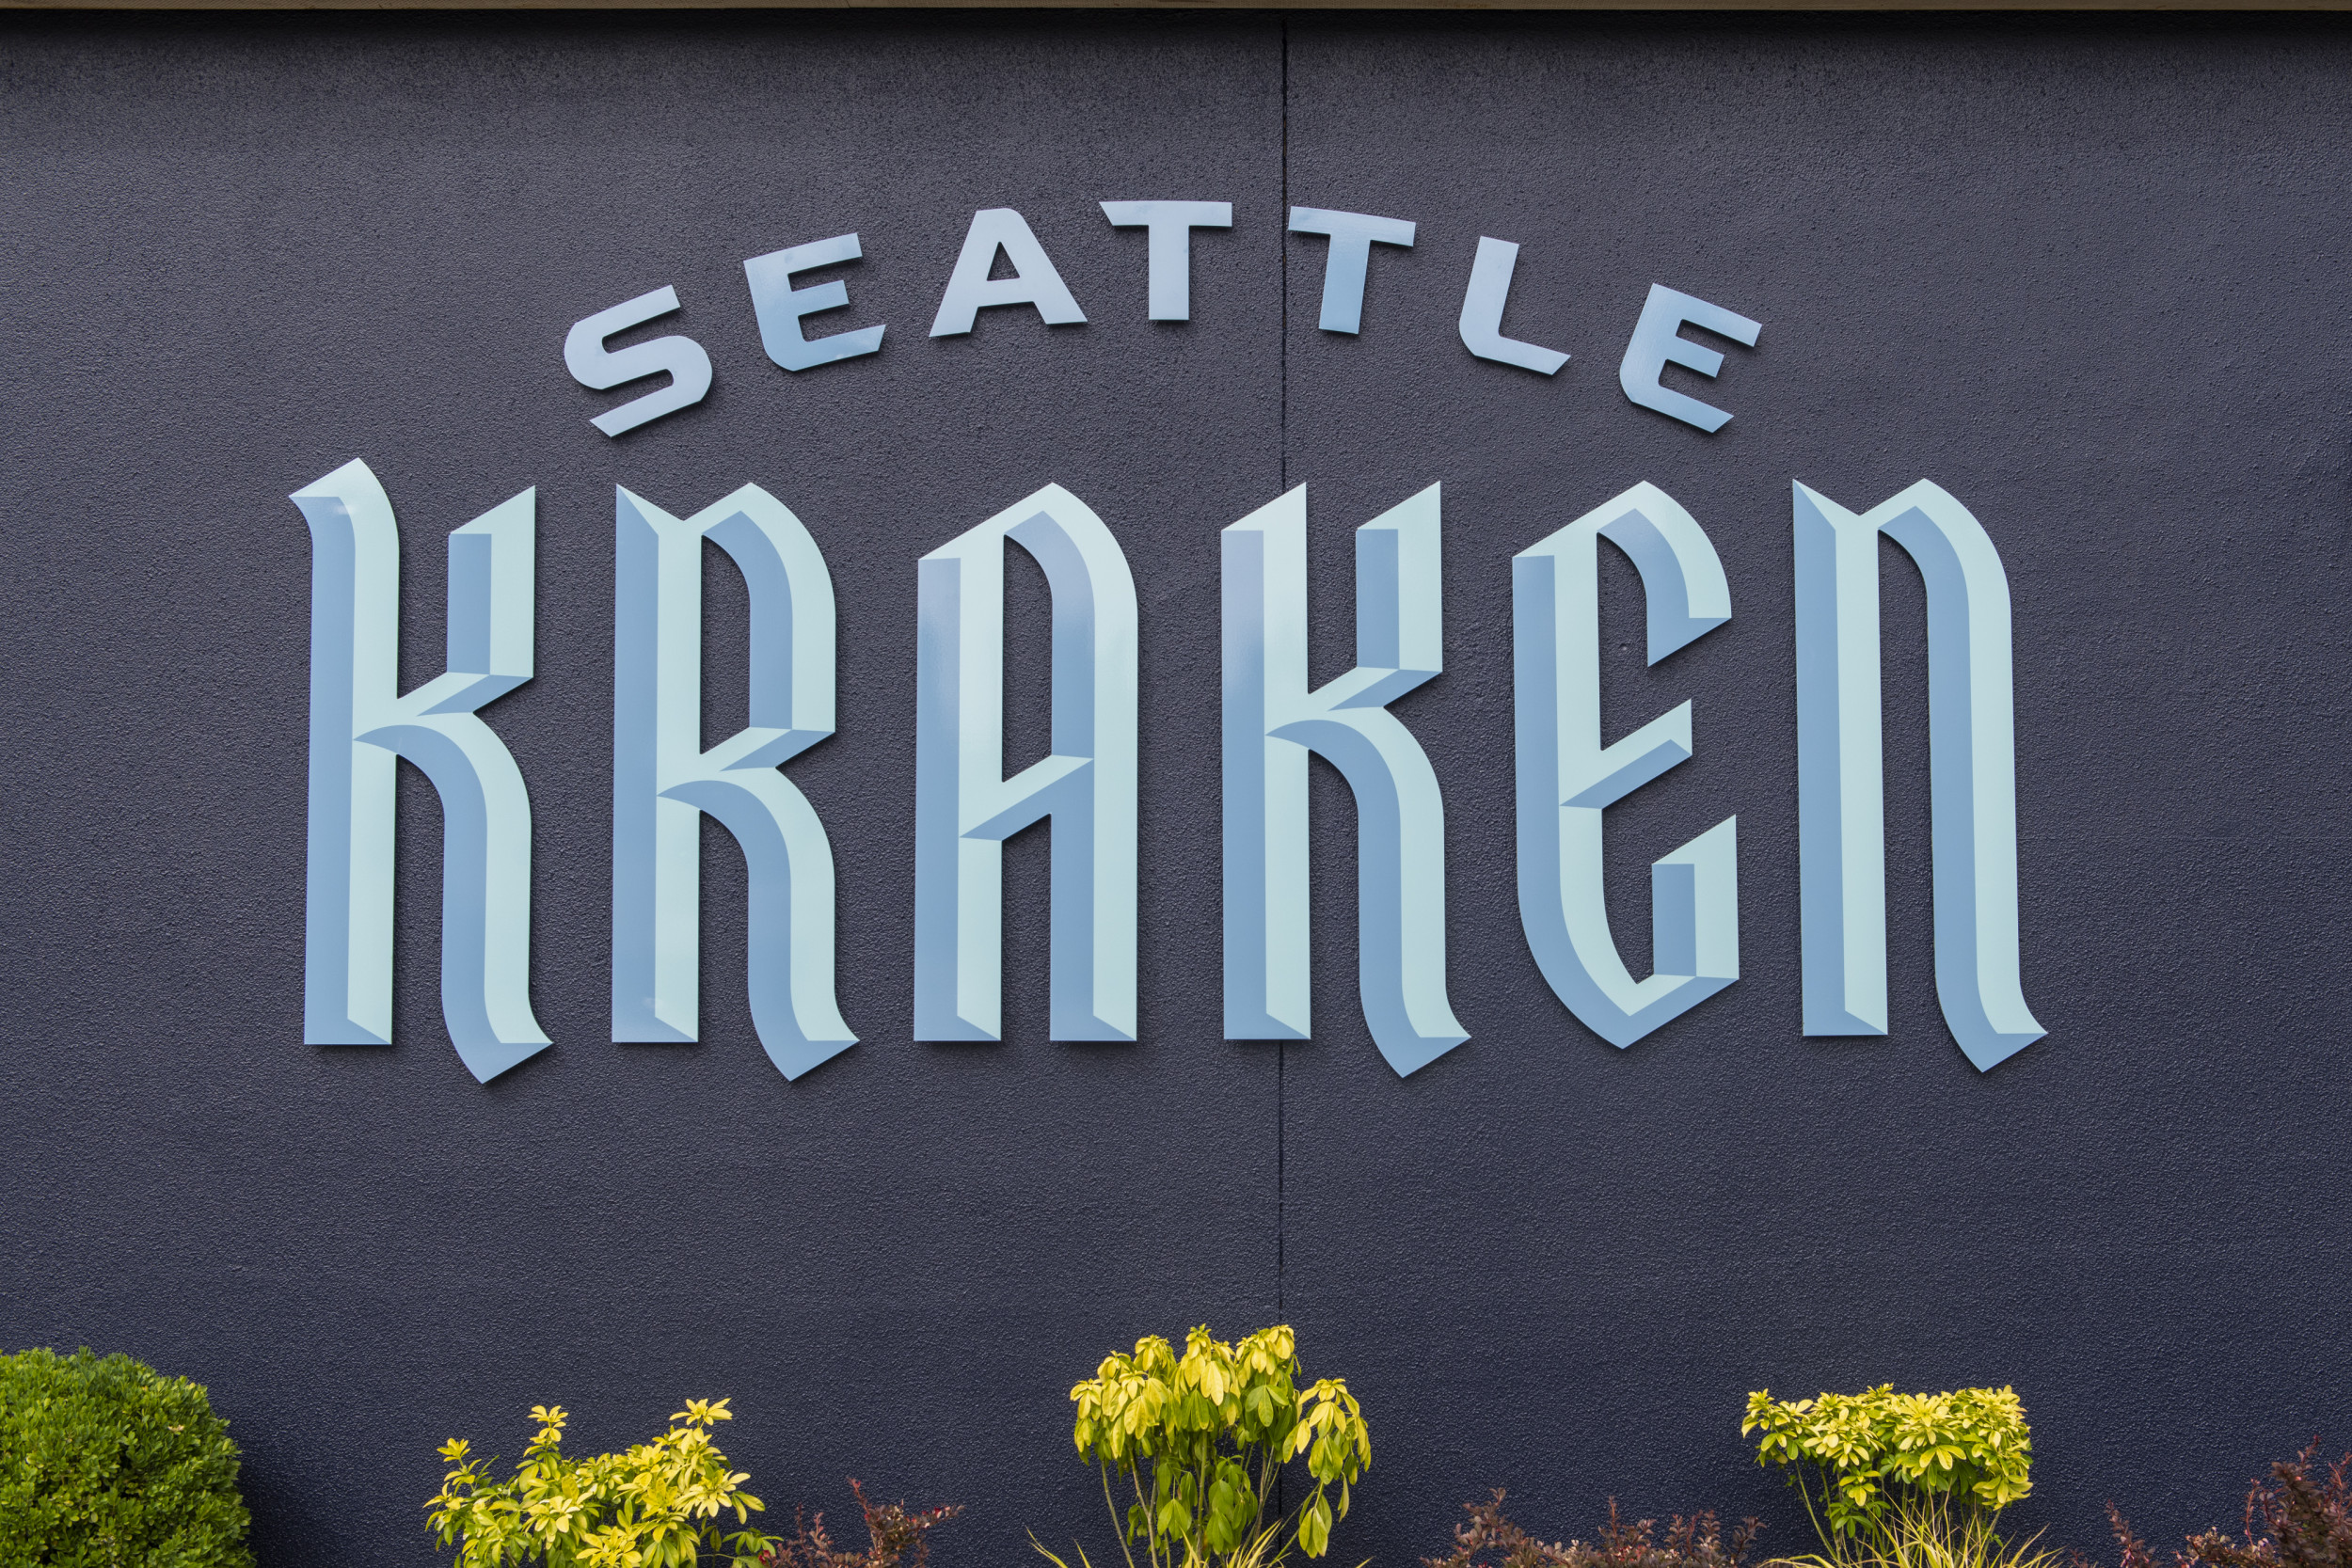 NHL's newest hockey team to be called Seattle Kraken - The Columbian